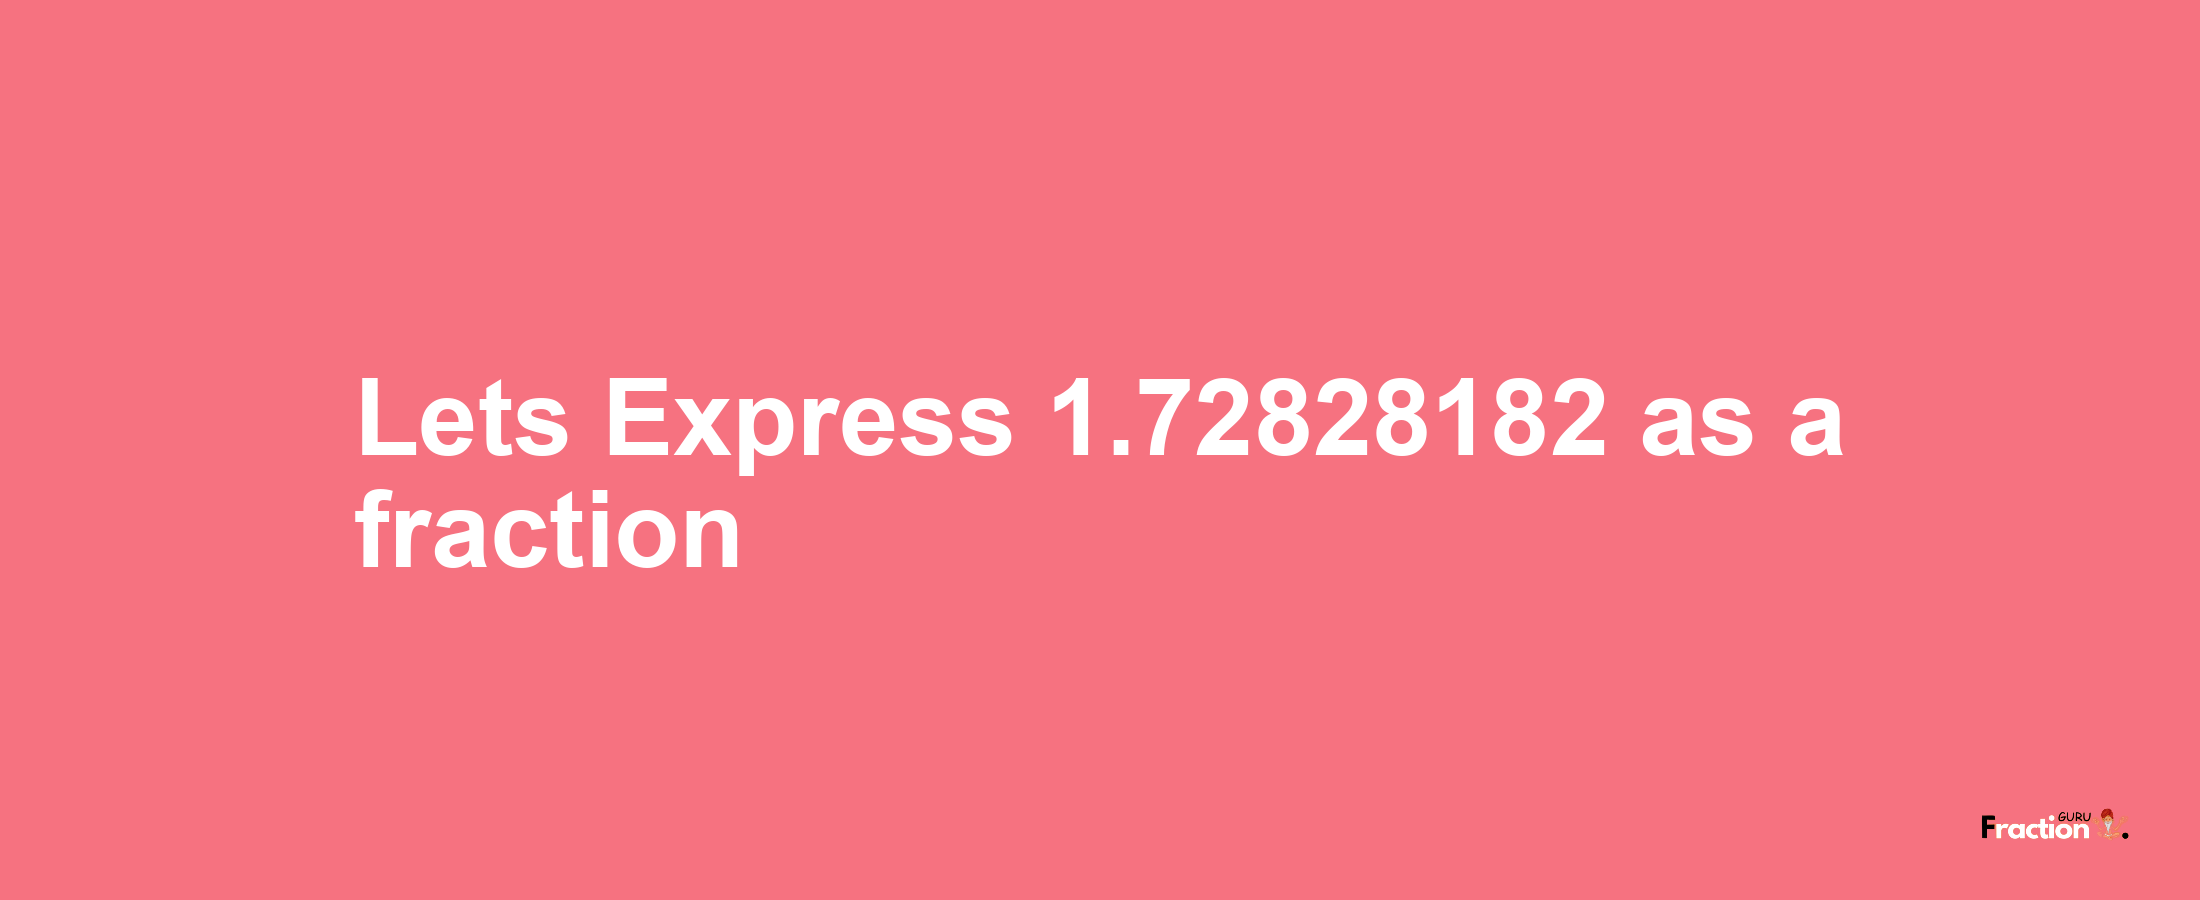 Lets Express 1.72828182 as afraction